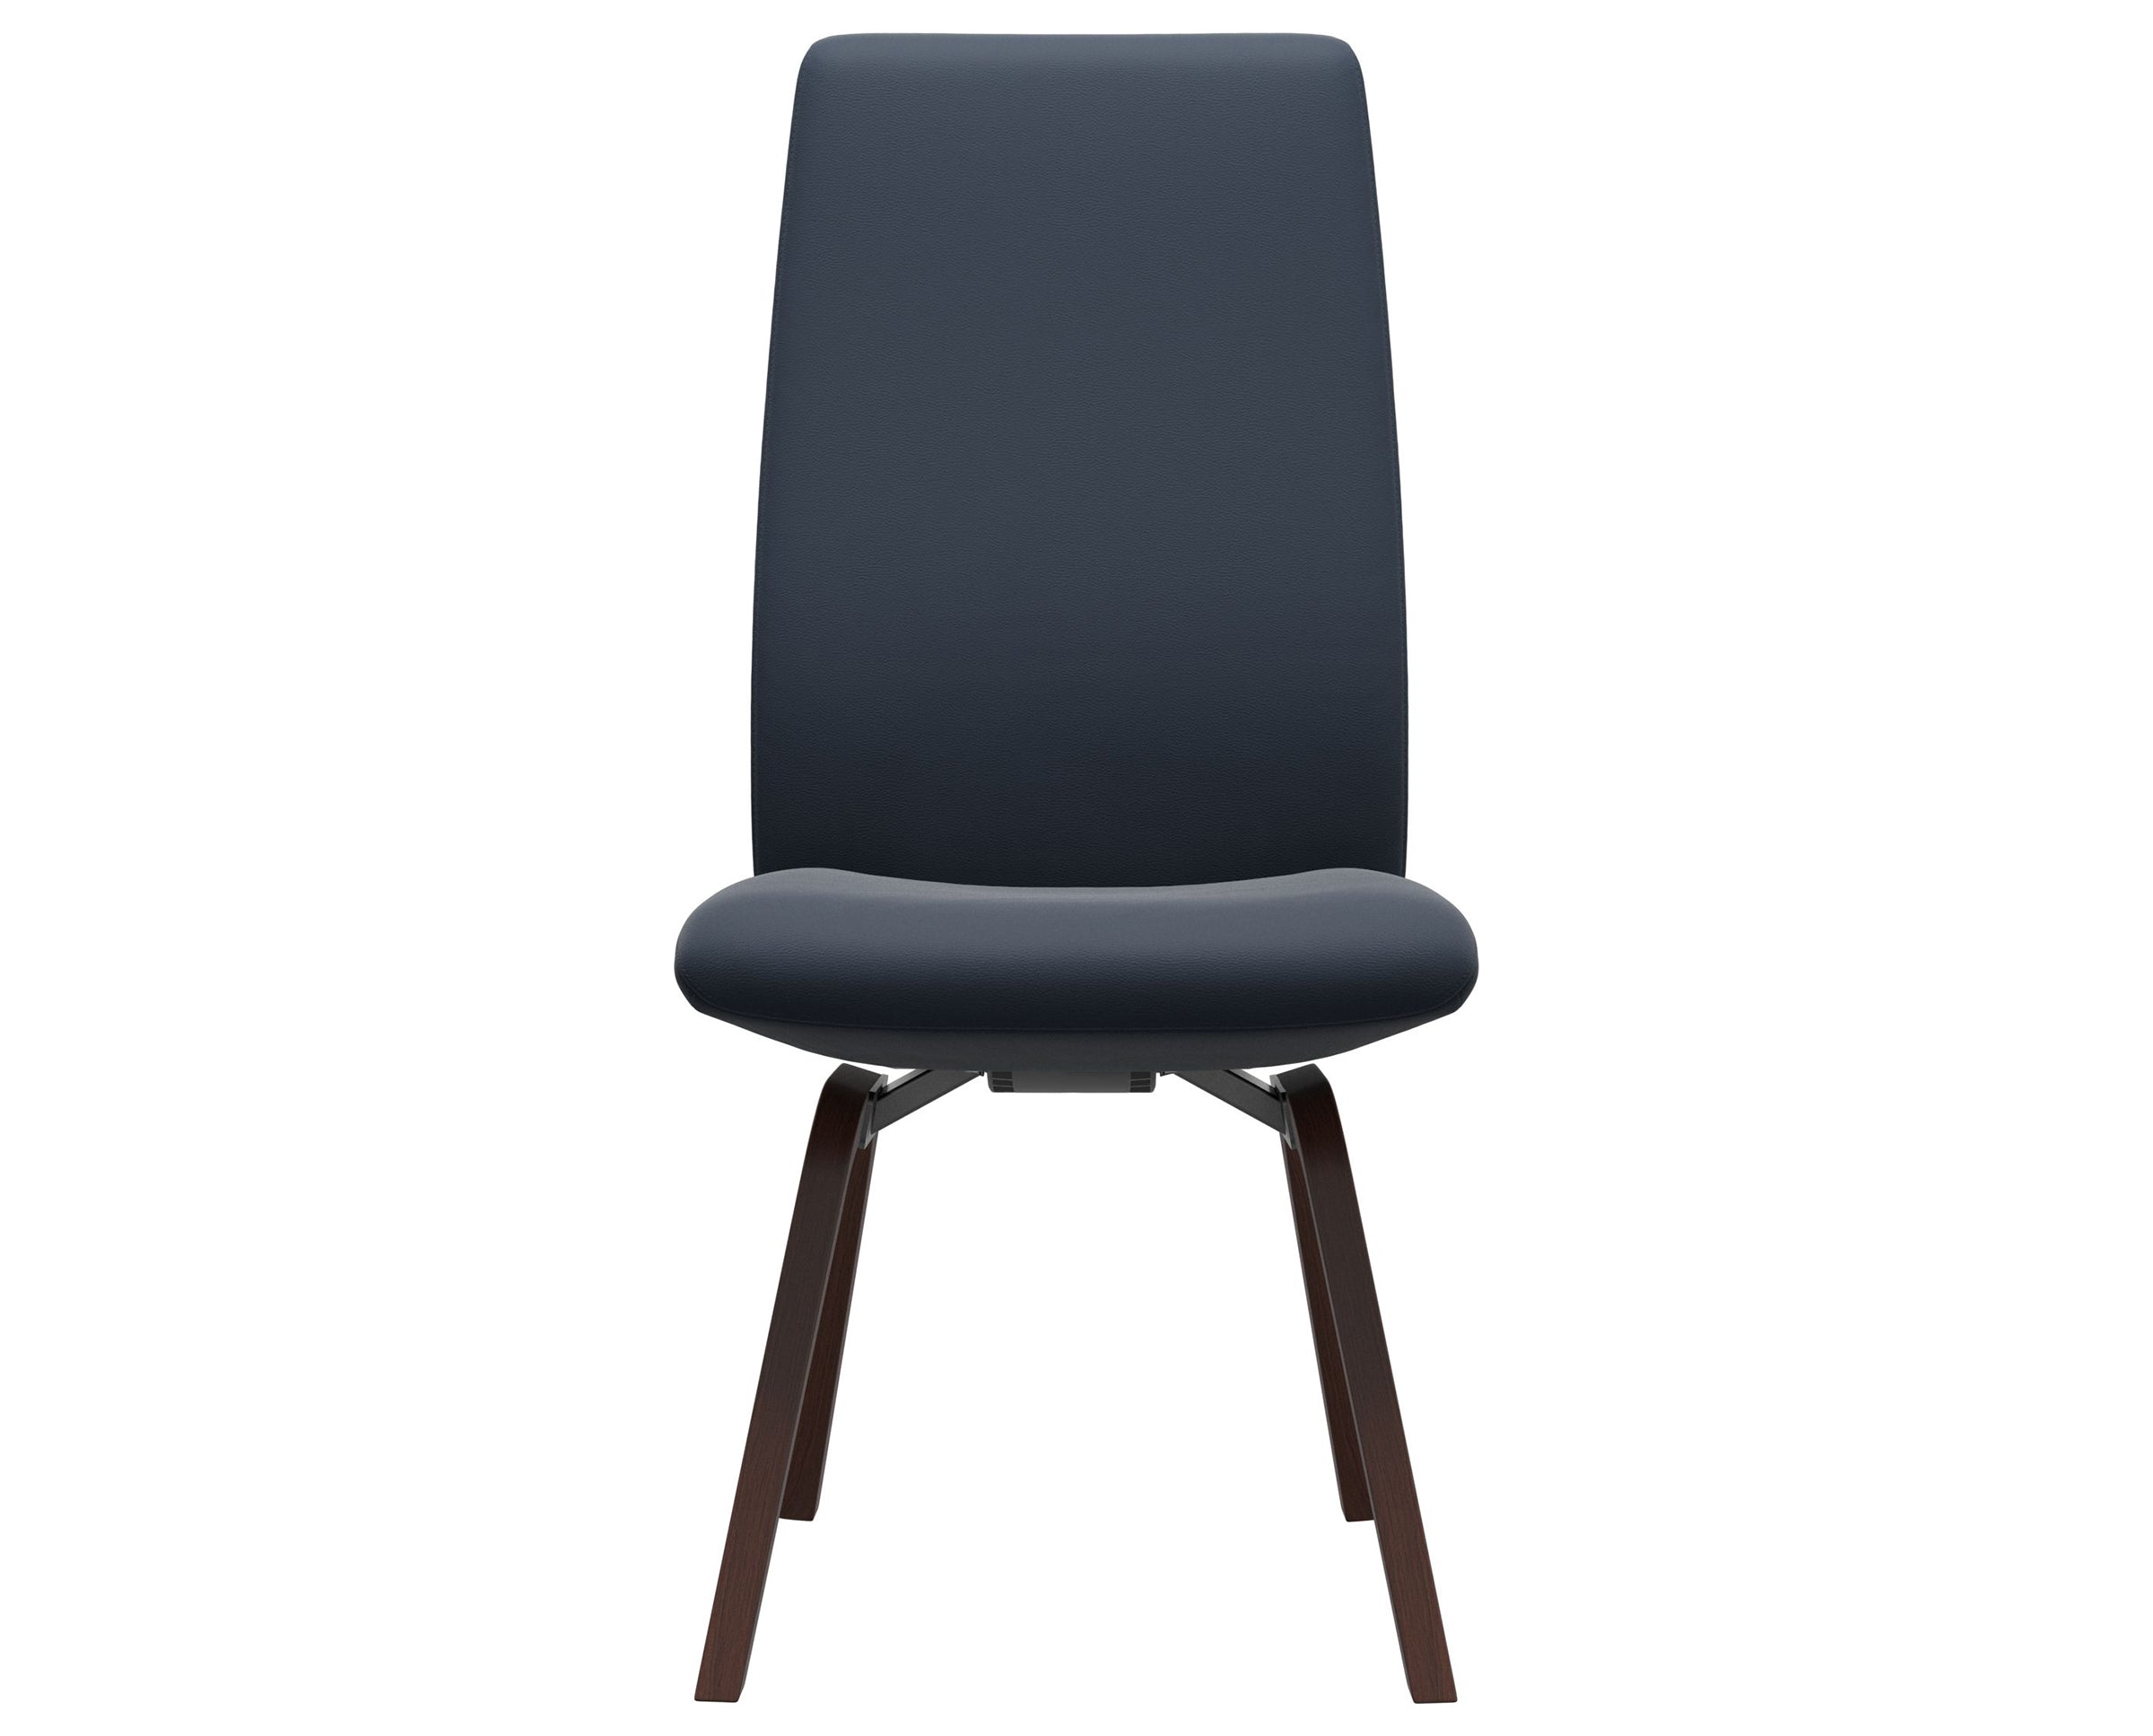 Paloma Leather Oxford Blue and Walnut Base | Stressless Laurel High Back D200 Dining Chair | Valley Ridge Furniture